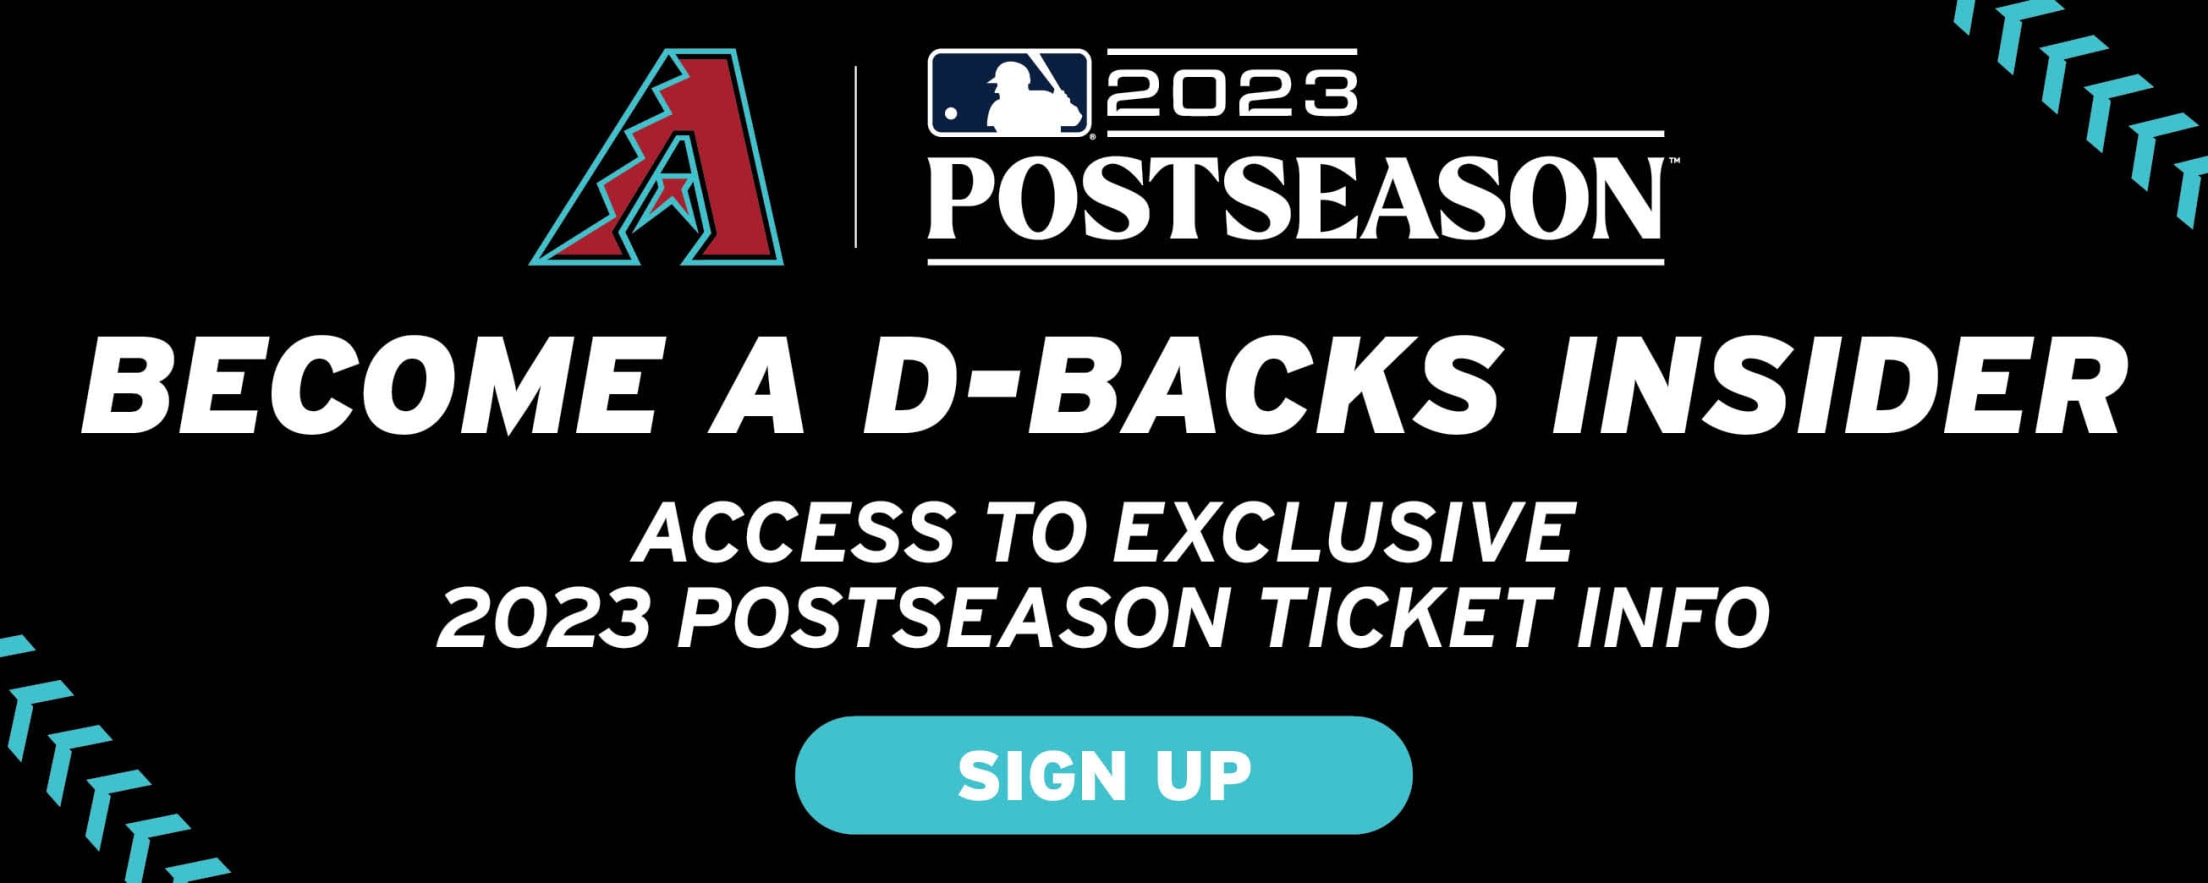 Here are some of the giveaways at 2023 D-backs home games 